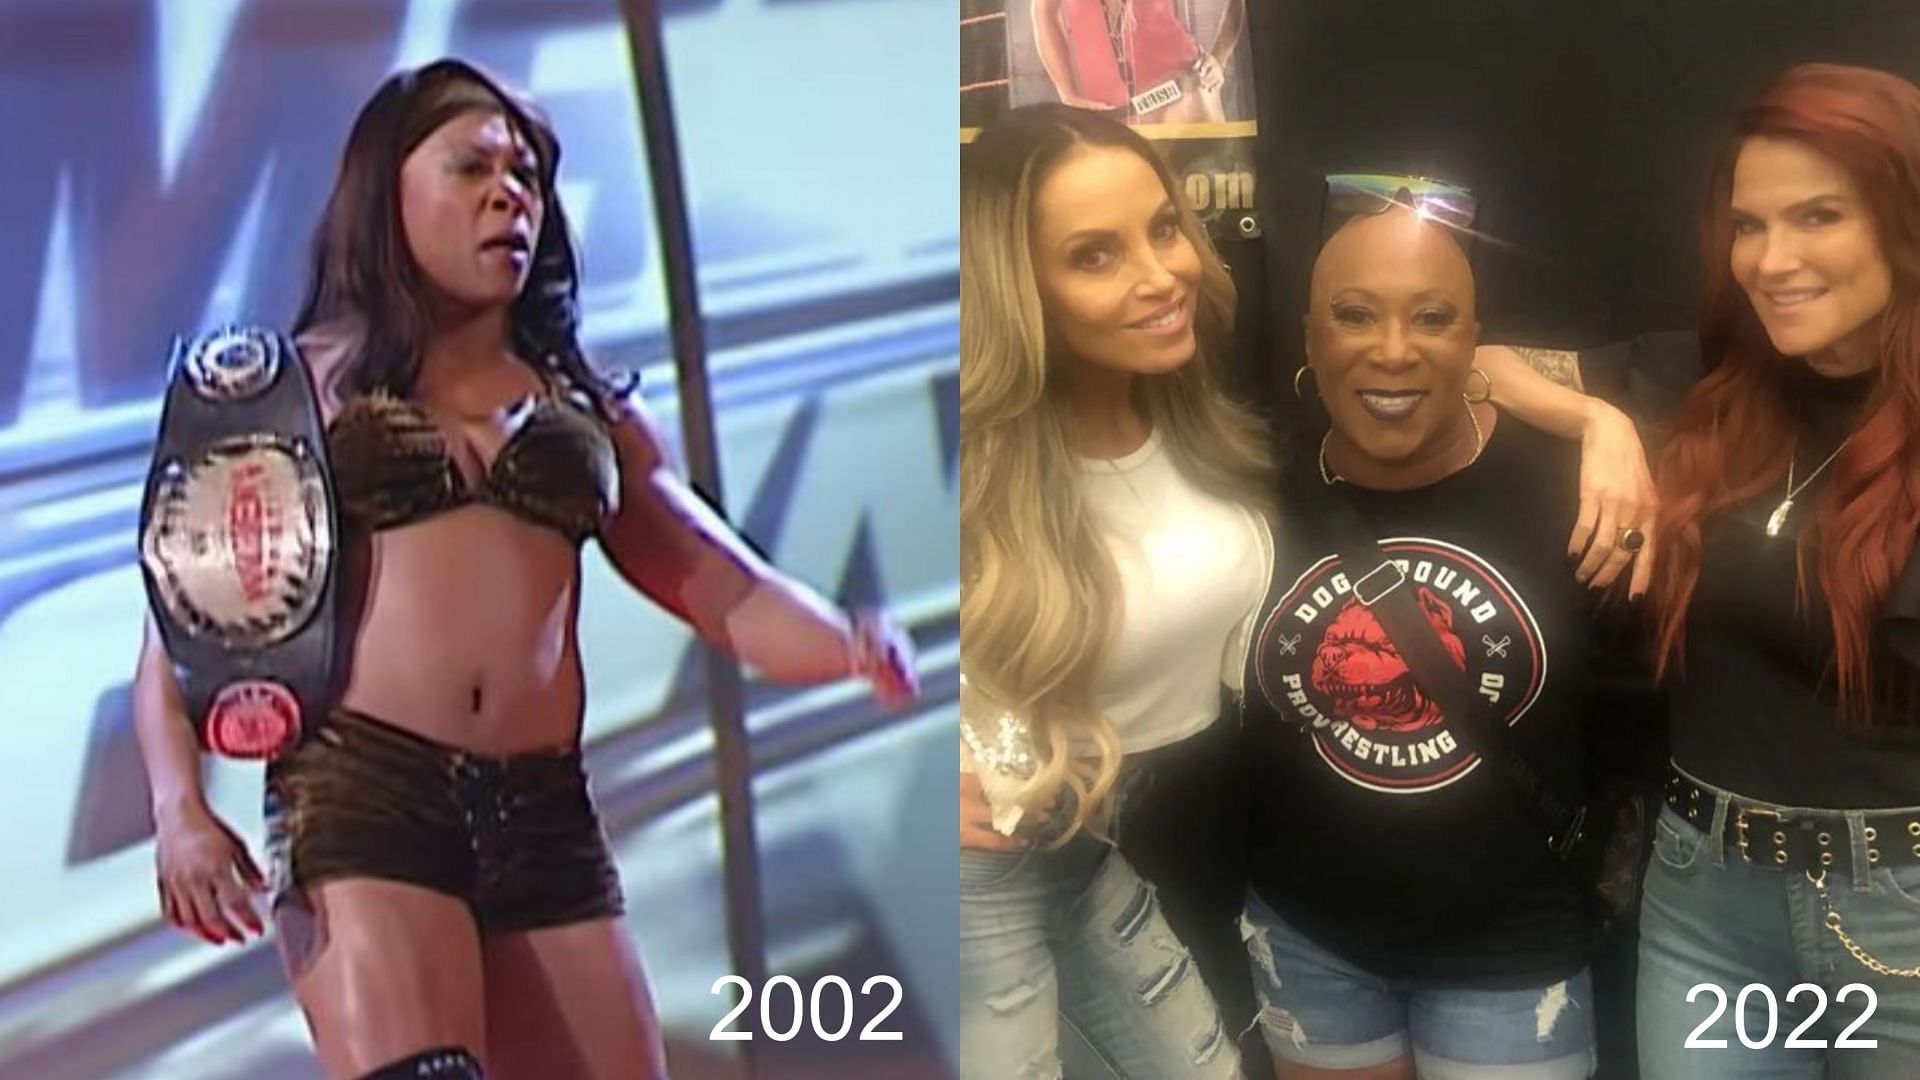 Jazz in 2002 (left) and Jazz with Trish Stratus and Lita in 2022 (right)